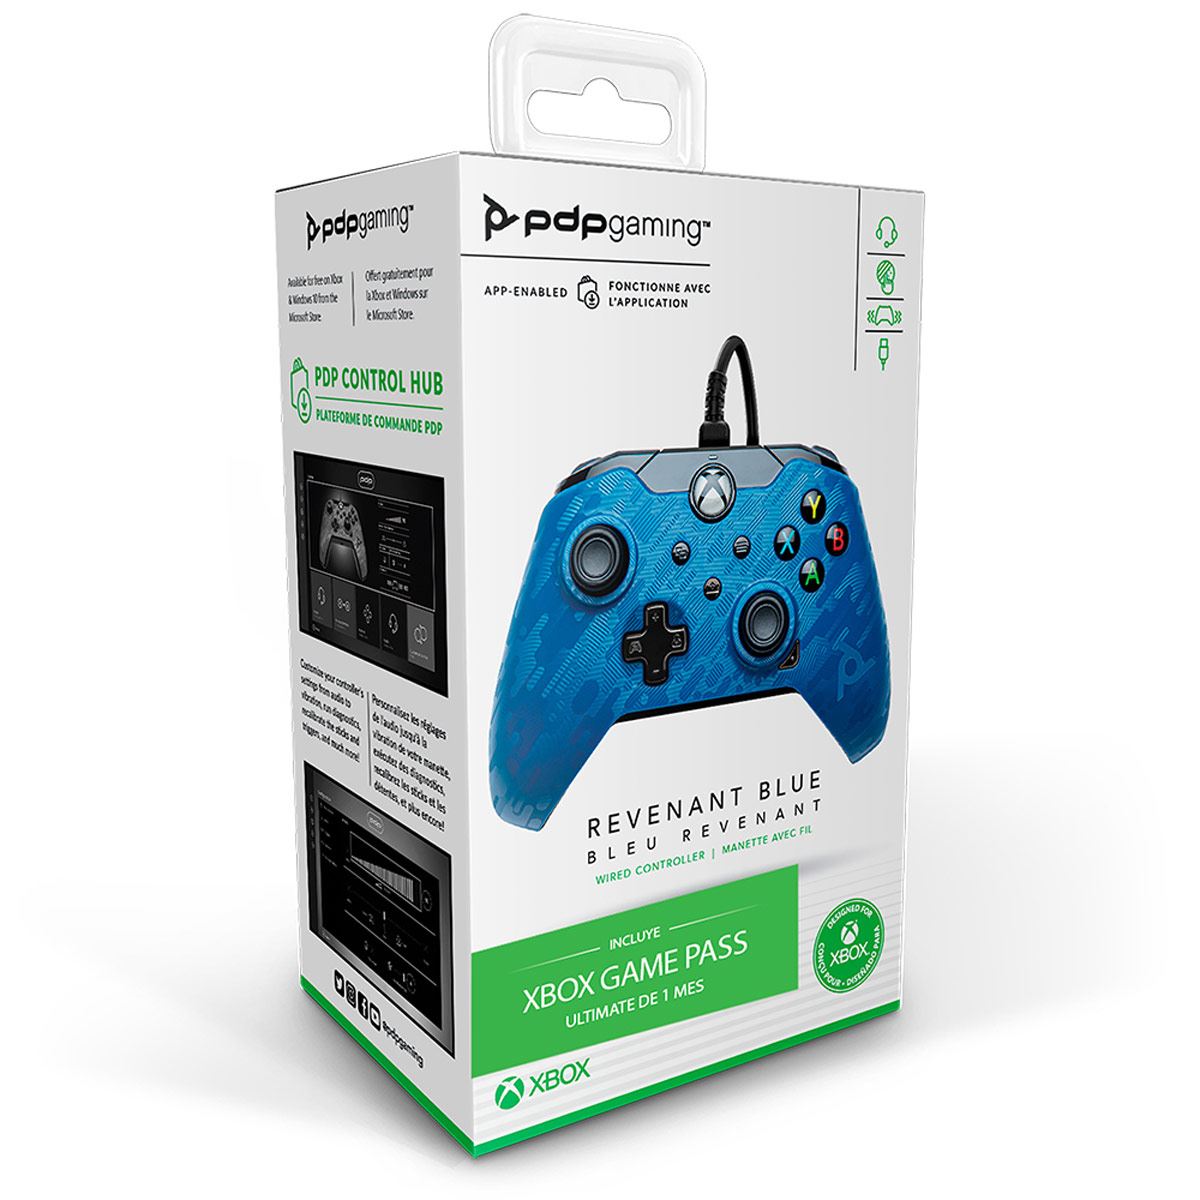 Mando PDP Wired Xbox/PC + 1 Mes Gamepass Electric Black